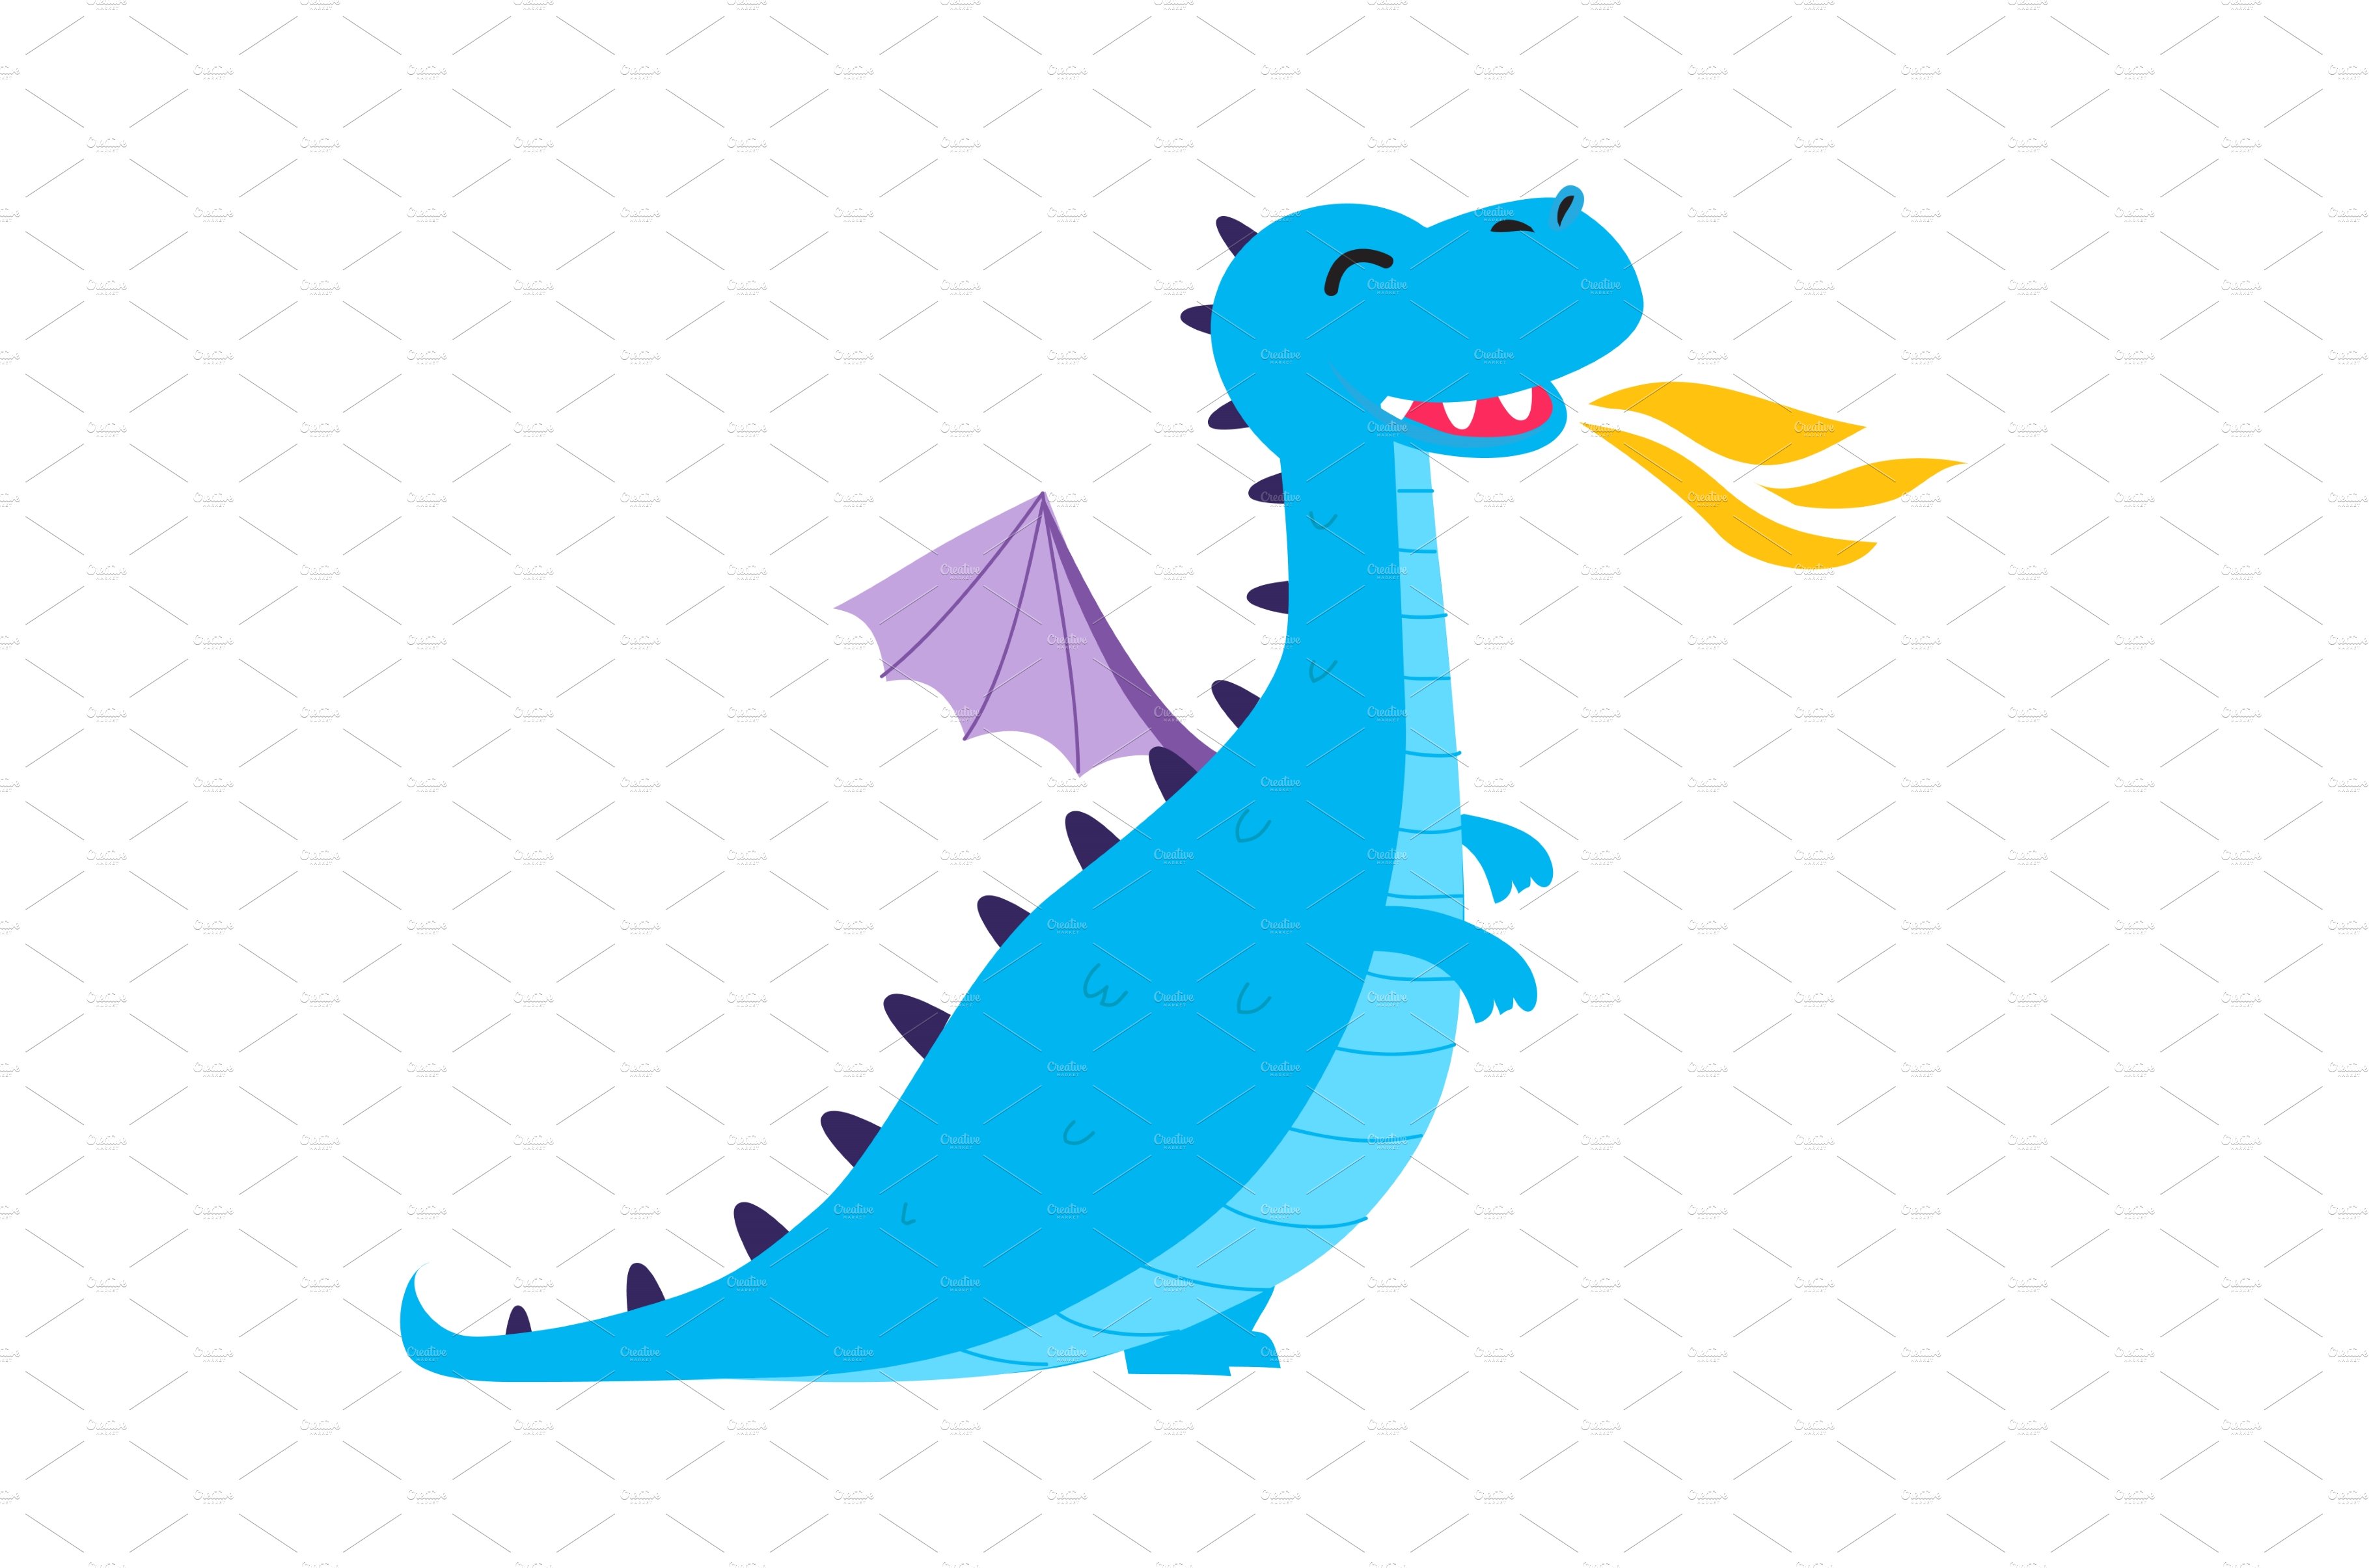 Cute Little Blue Baby Dragon cover image.